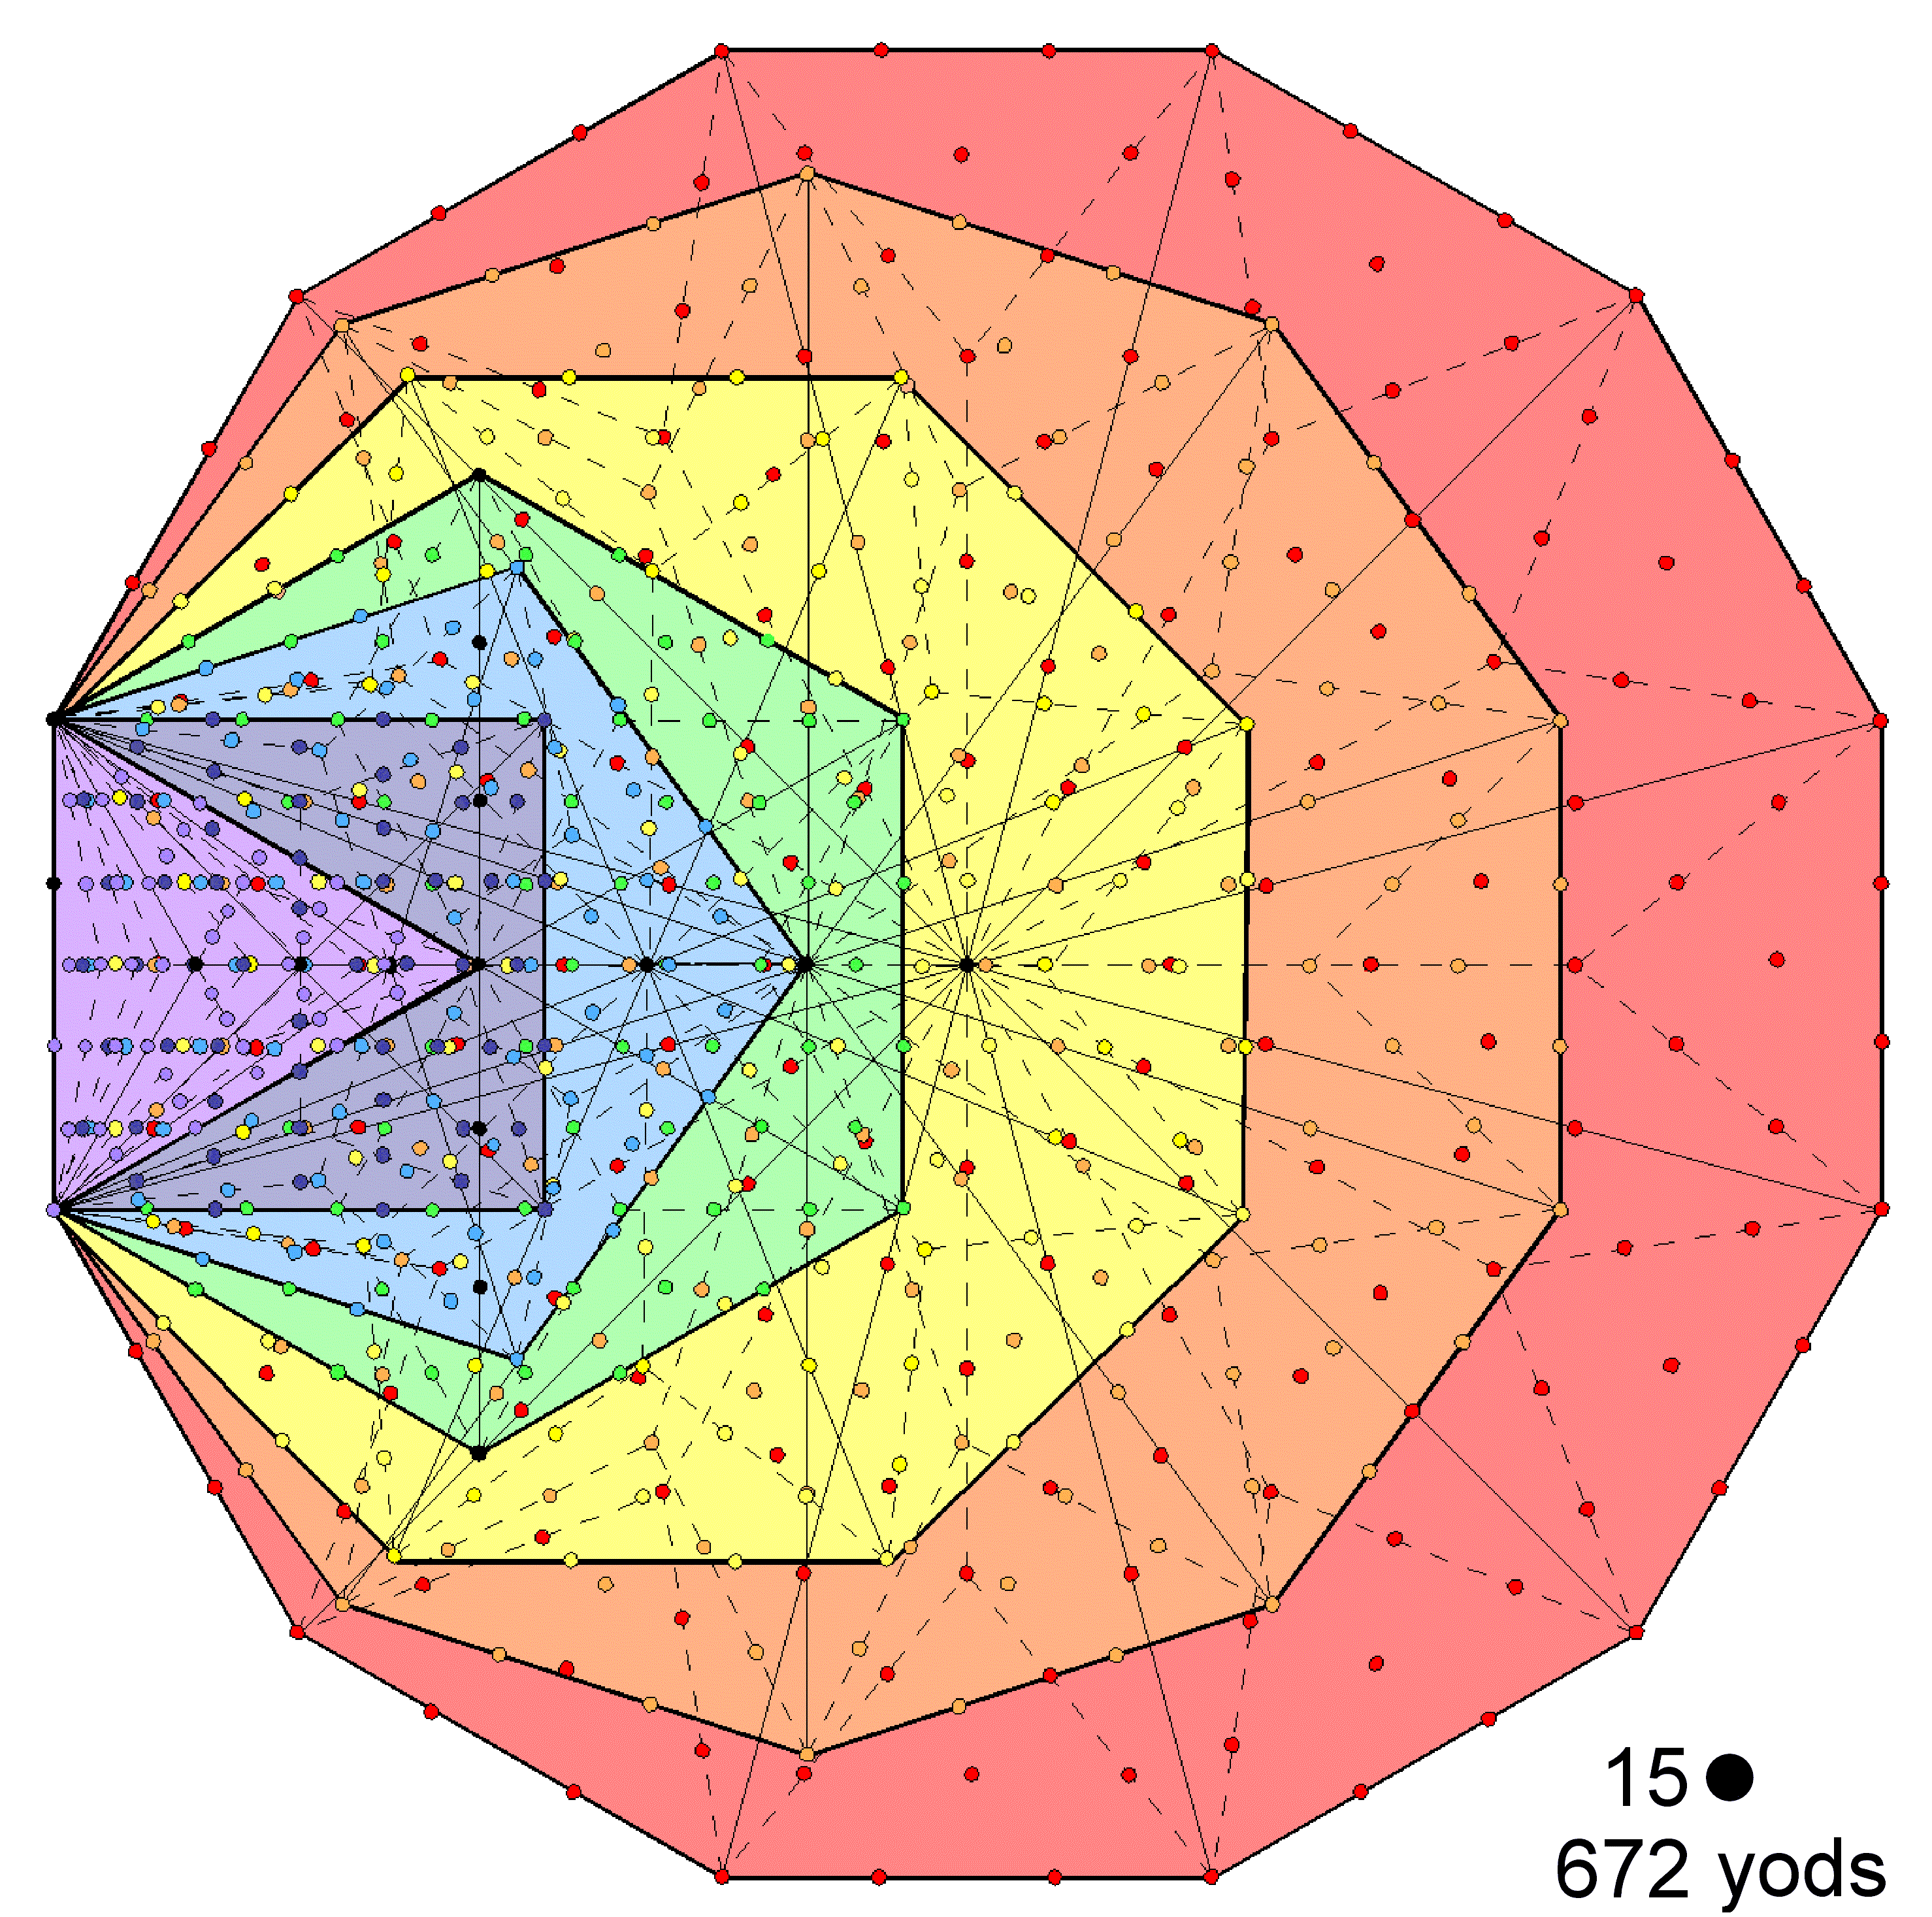 (15+672) yods in 7 enfolded Type B polygons